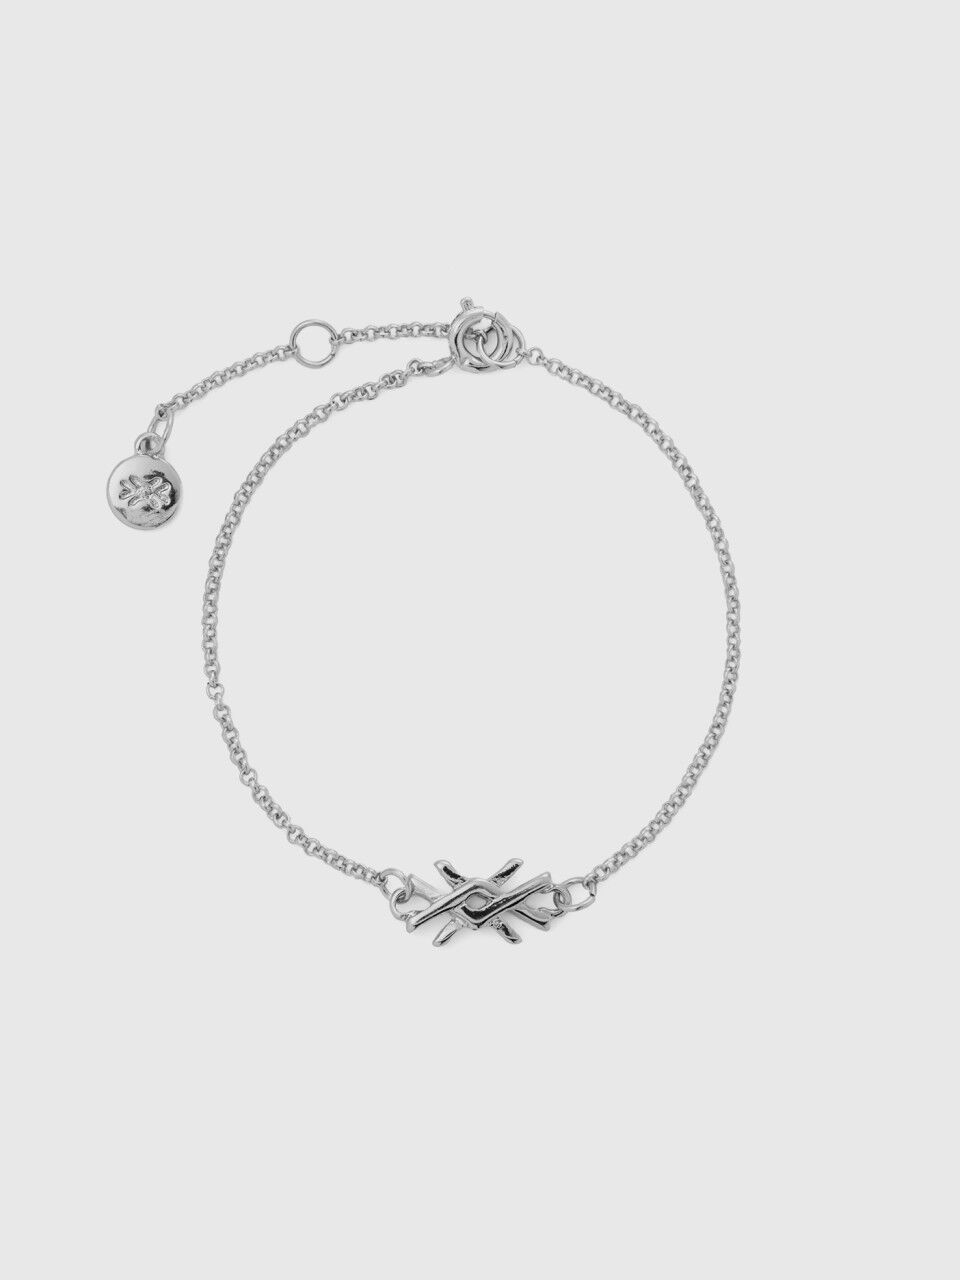 Silver bracelet with charm and logo